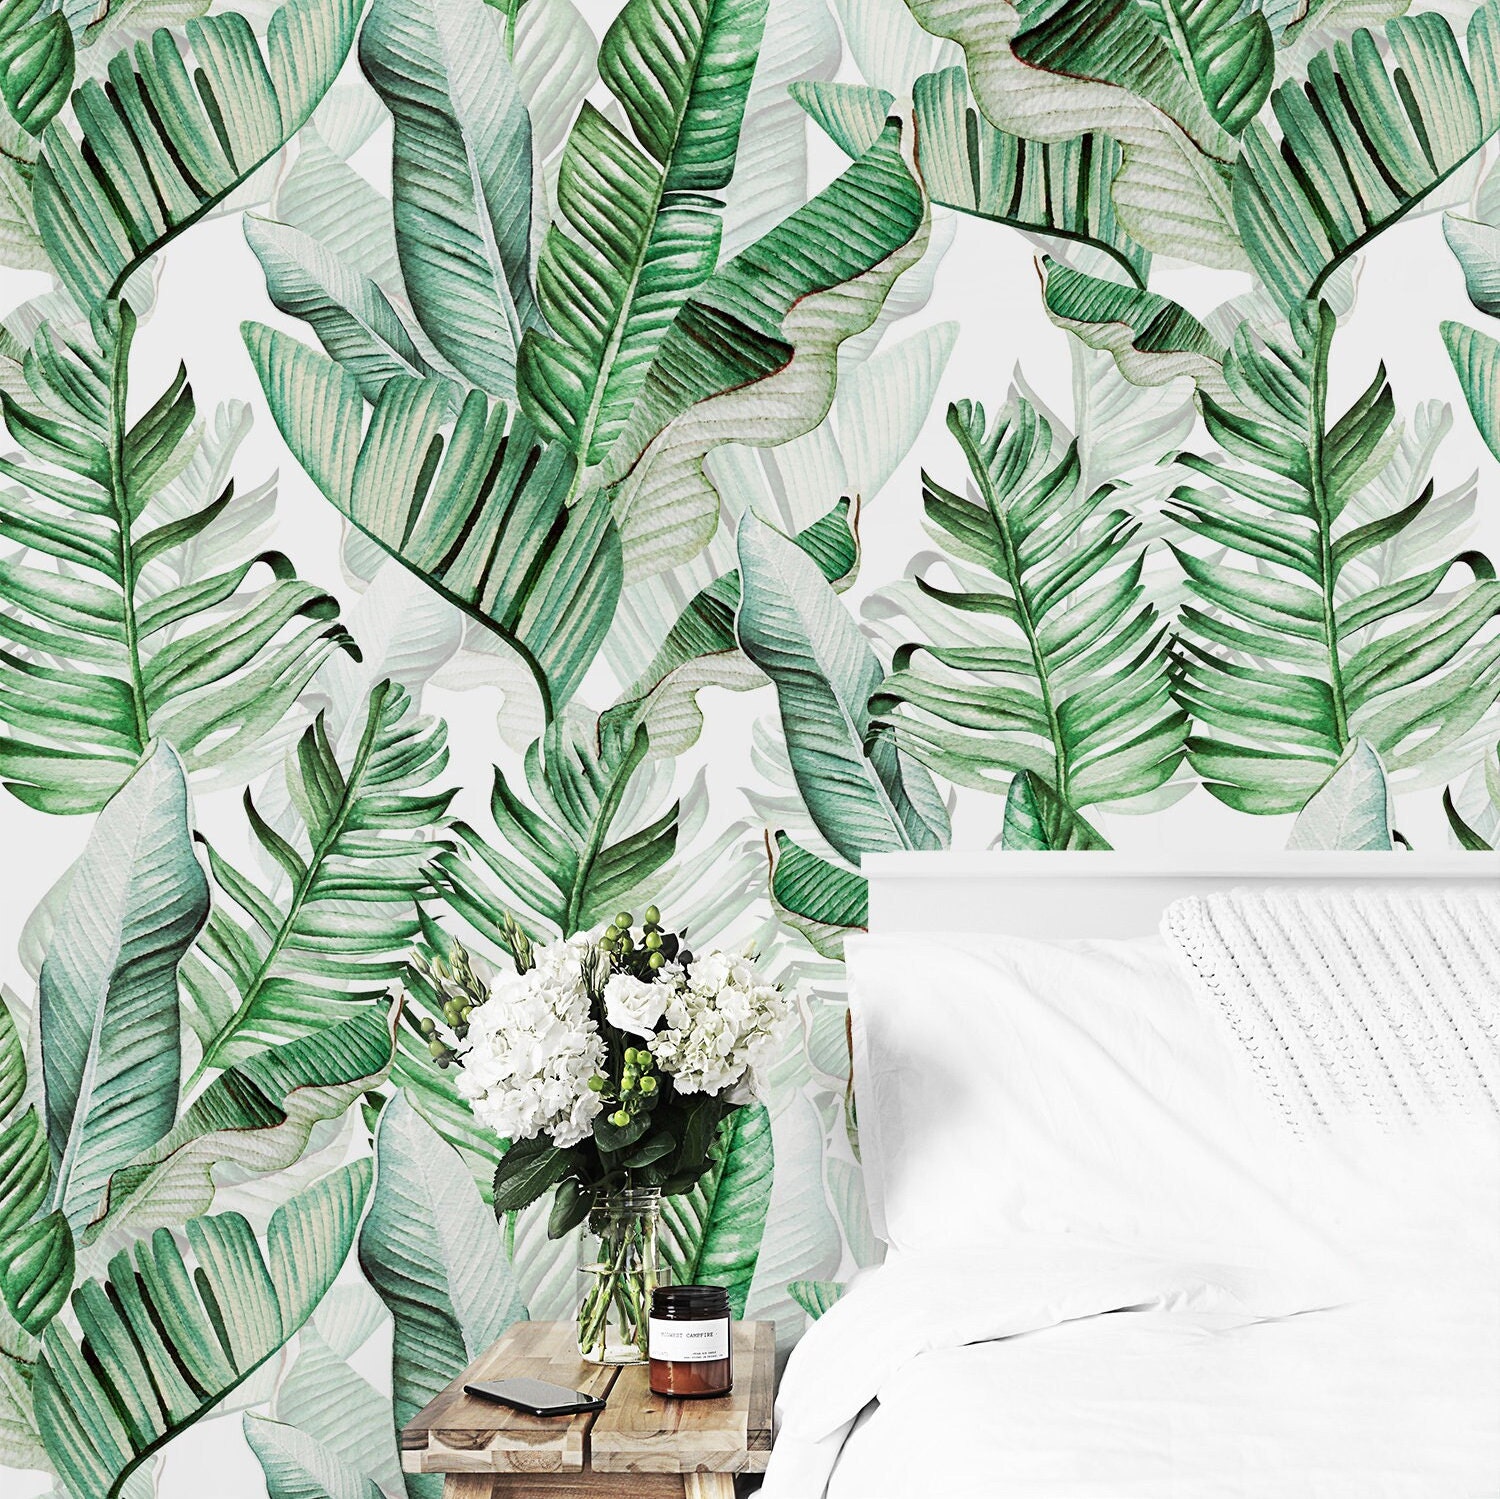 CRE8TIVE Tropical Wallpaper Peel and Stick Jungle India  Ubuy